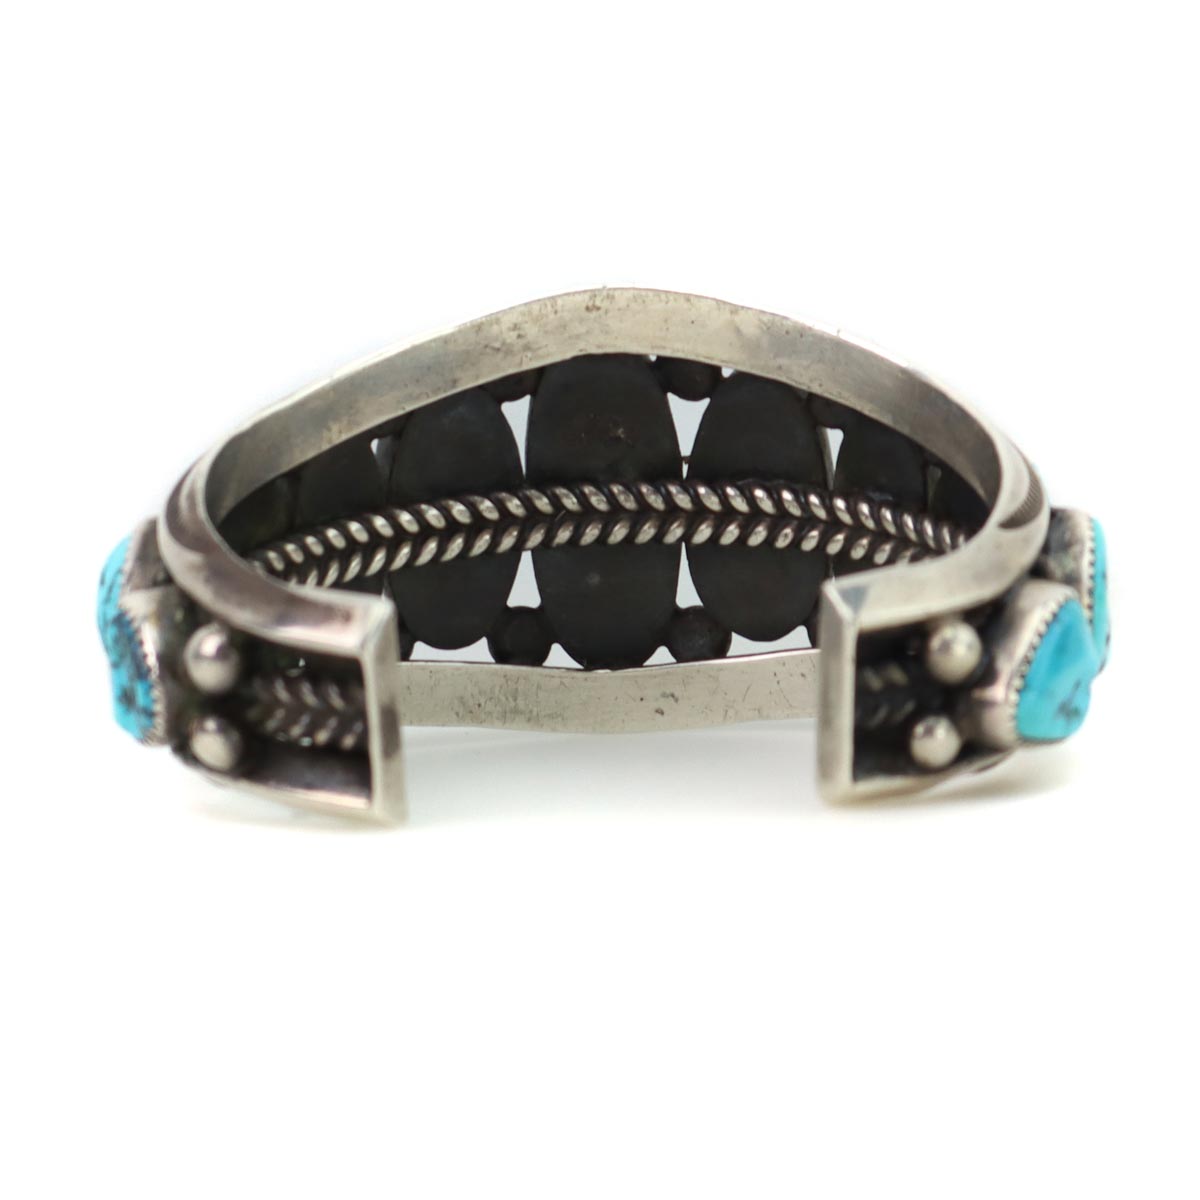 Orville Tsinnie (1943-2017) - Navajo Turquoise and Sterling Silver Bracelet with Stamped Design c. 1990-2000s, size 6.75 (J15079)2
